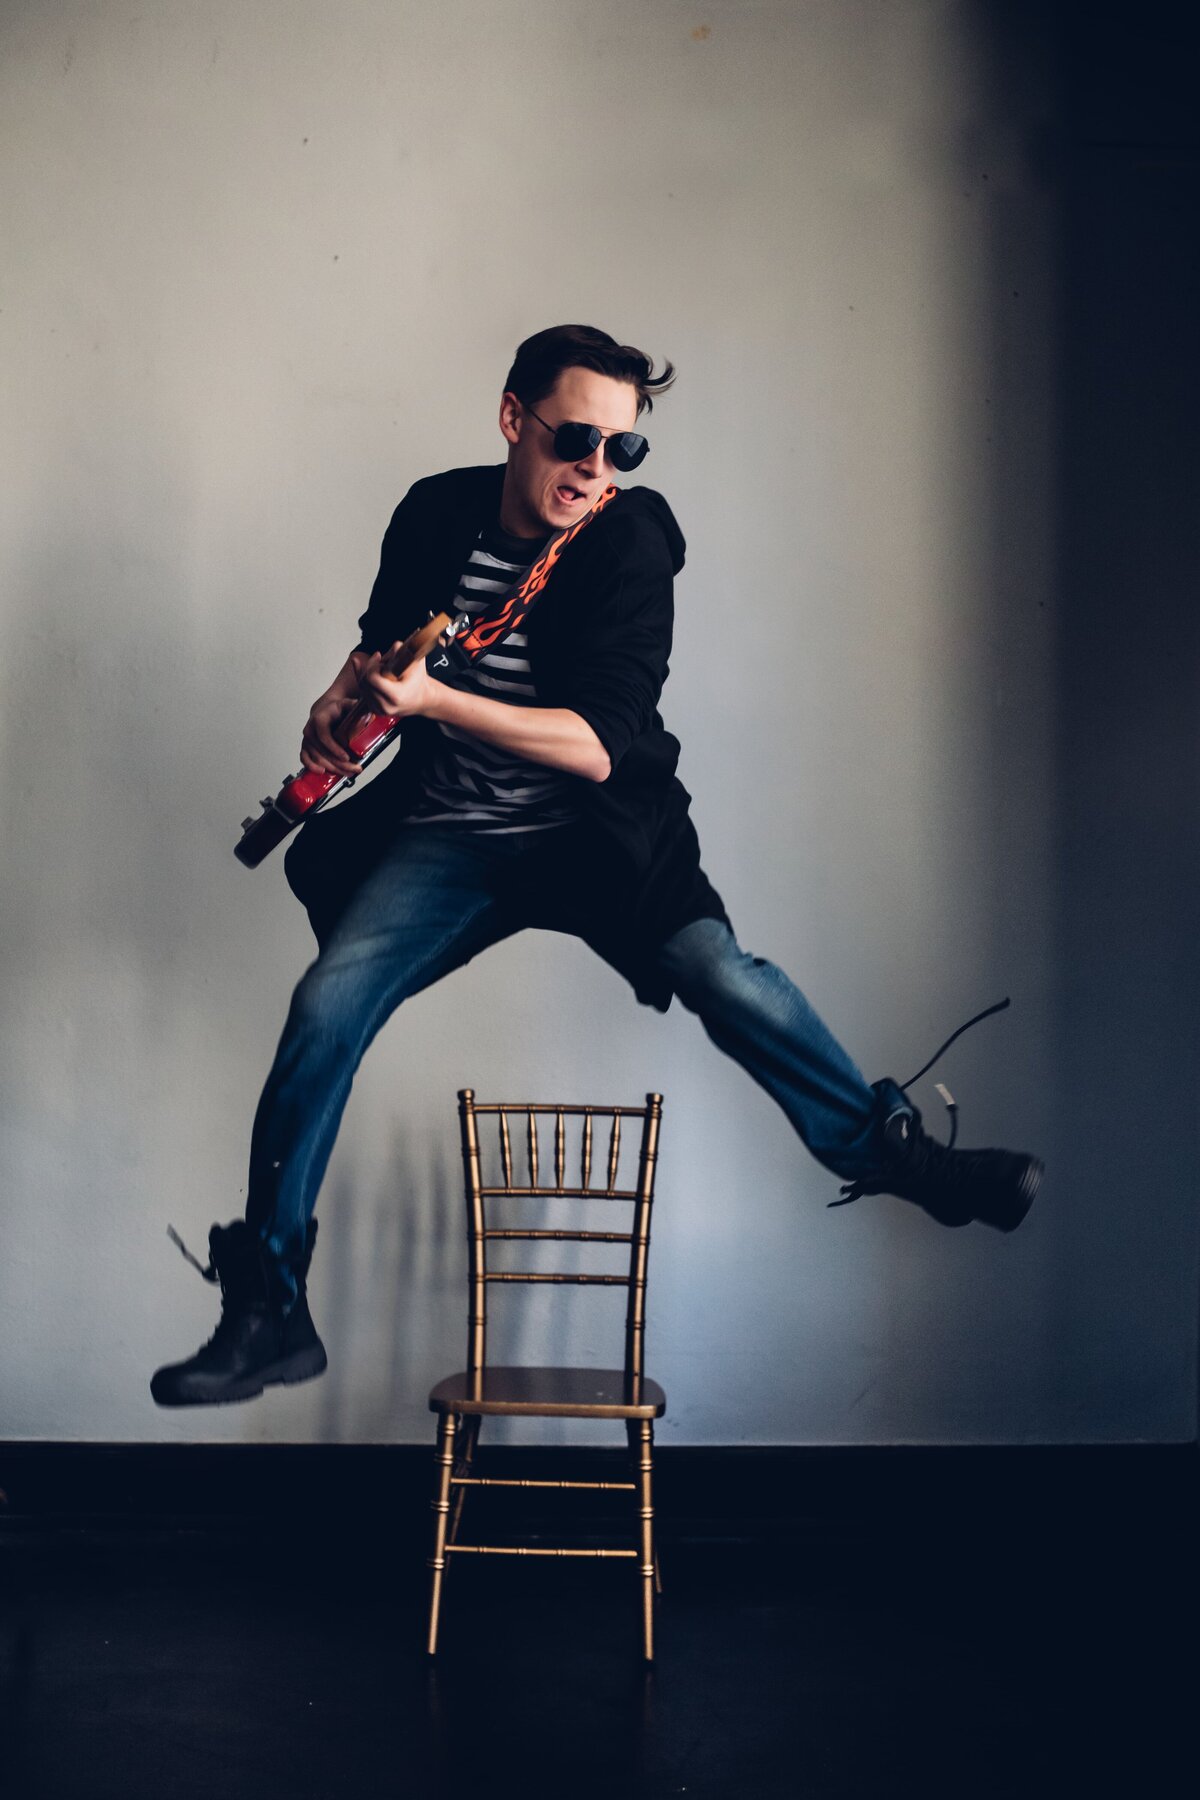 A young man jumping over a chair with a guitar, captured by Senior portrait photographer Britt Elizabeth